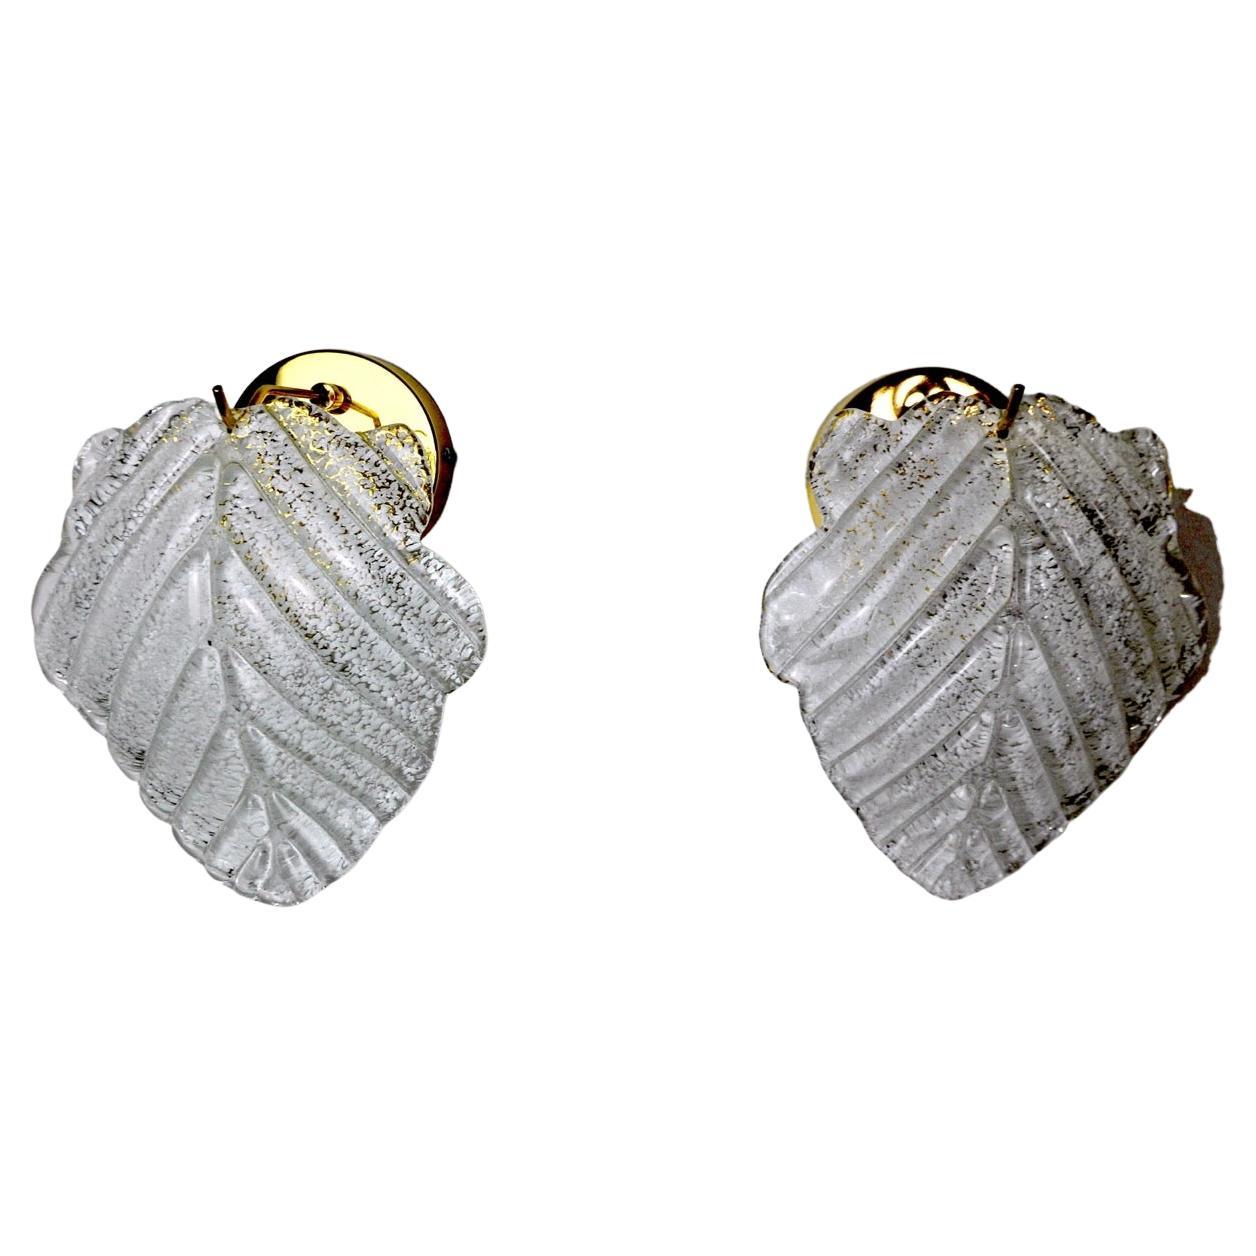 Pair of "Leaf" Sconces by Murano Mazzega Italy, 1970